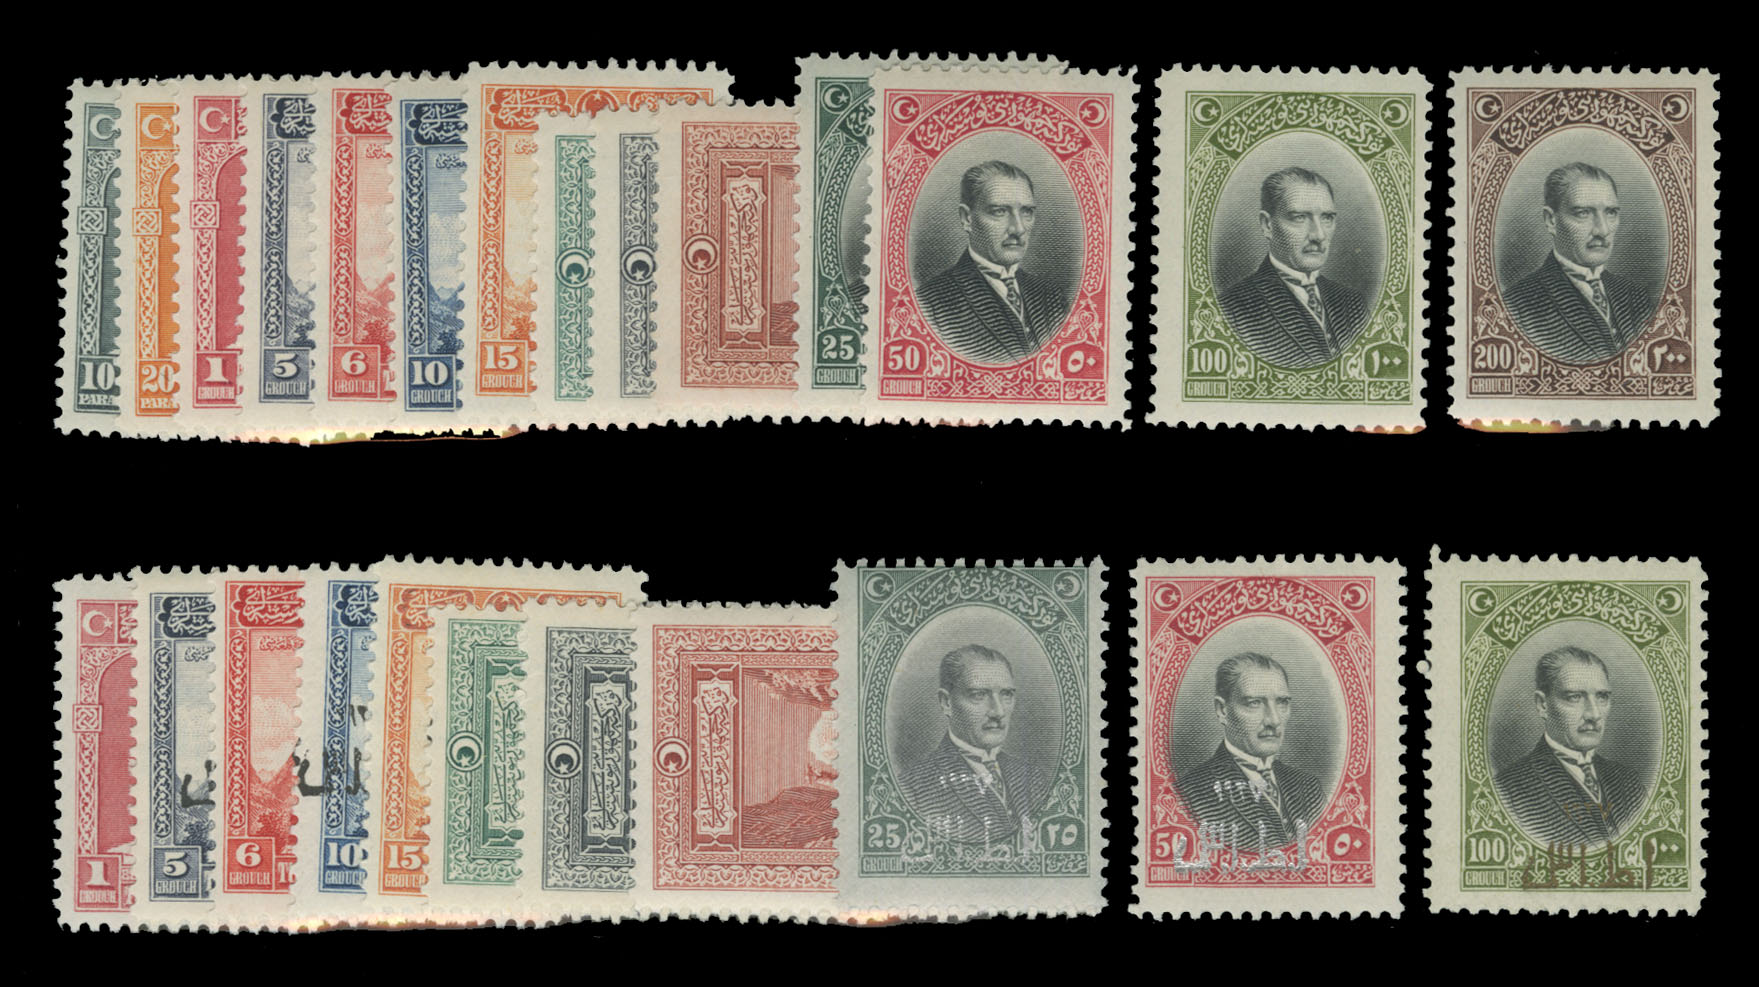 Lot 1345 - LARGE LOTS AND COLLECTIONS UNITED STATES - Covers and Postal History  -  Cherrystone Auctions U.S. & Worldwide Stamps & Postal History